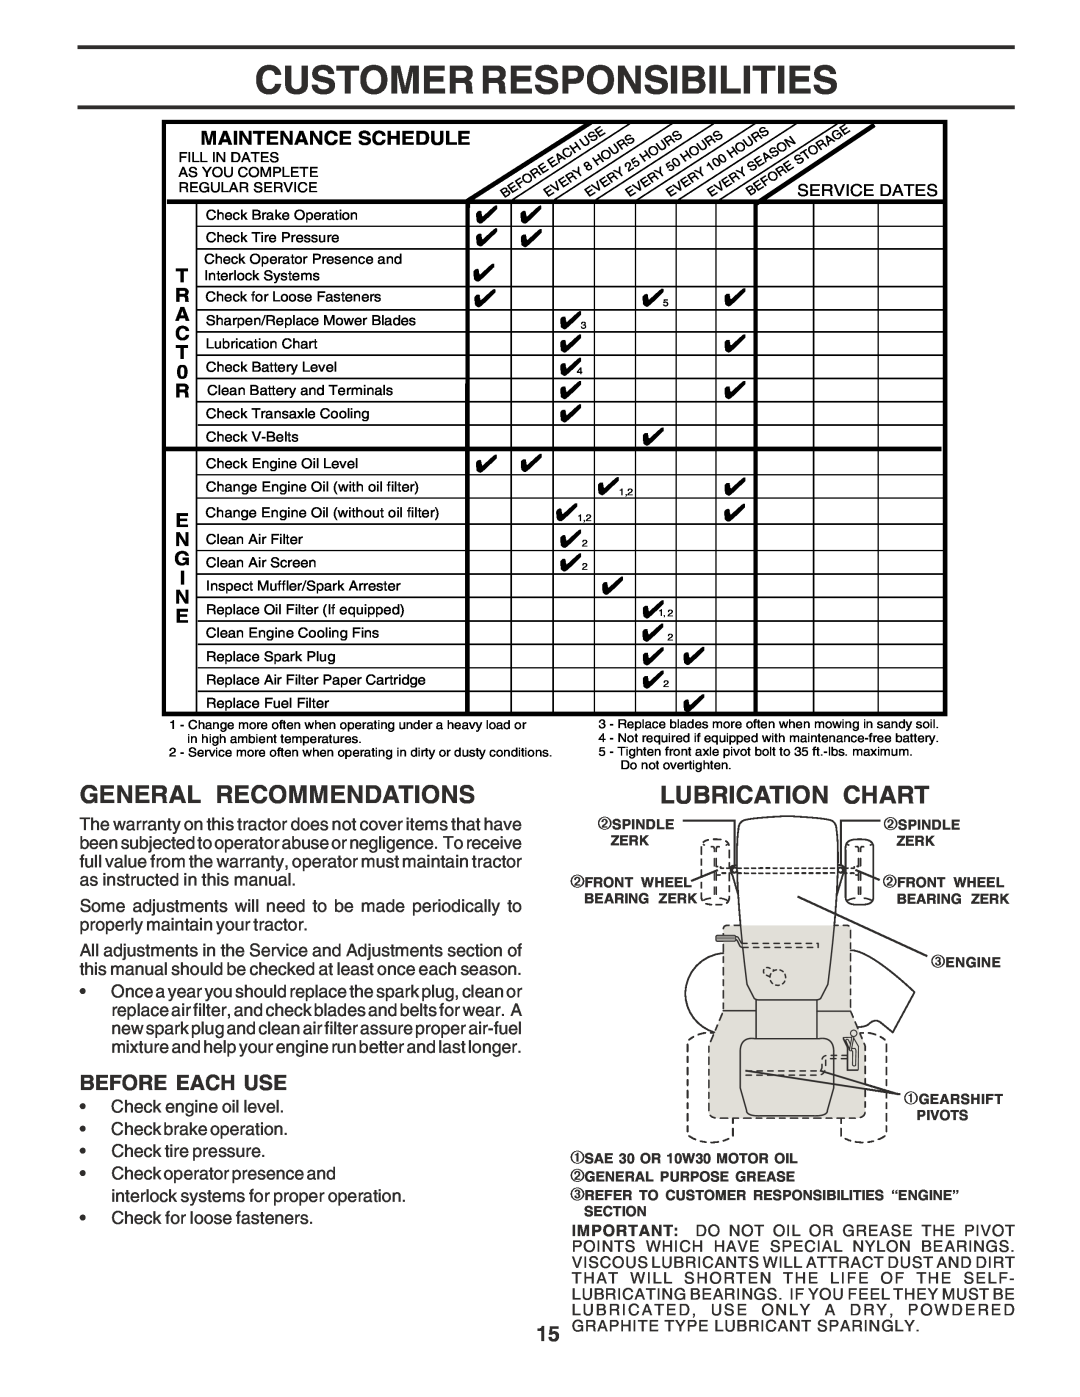 Poulan PPR2042STB owner manual Customer Responsibilities, General Recommendations, Lubrication Chart, Before Each Use 